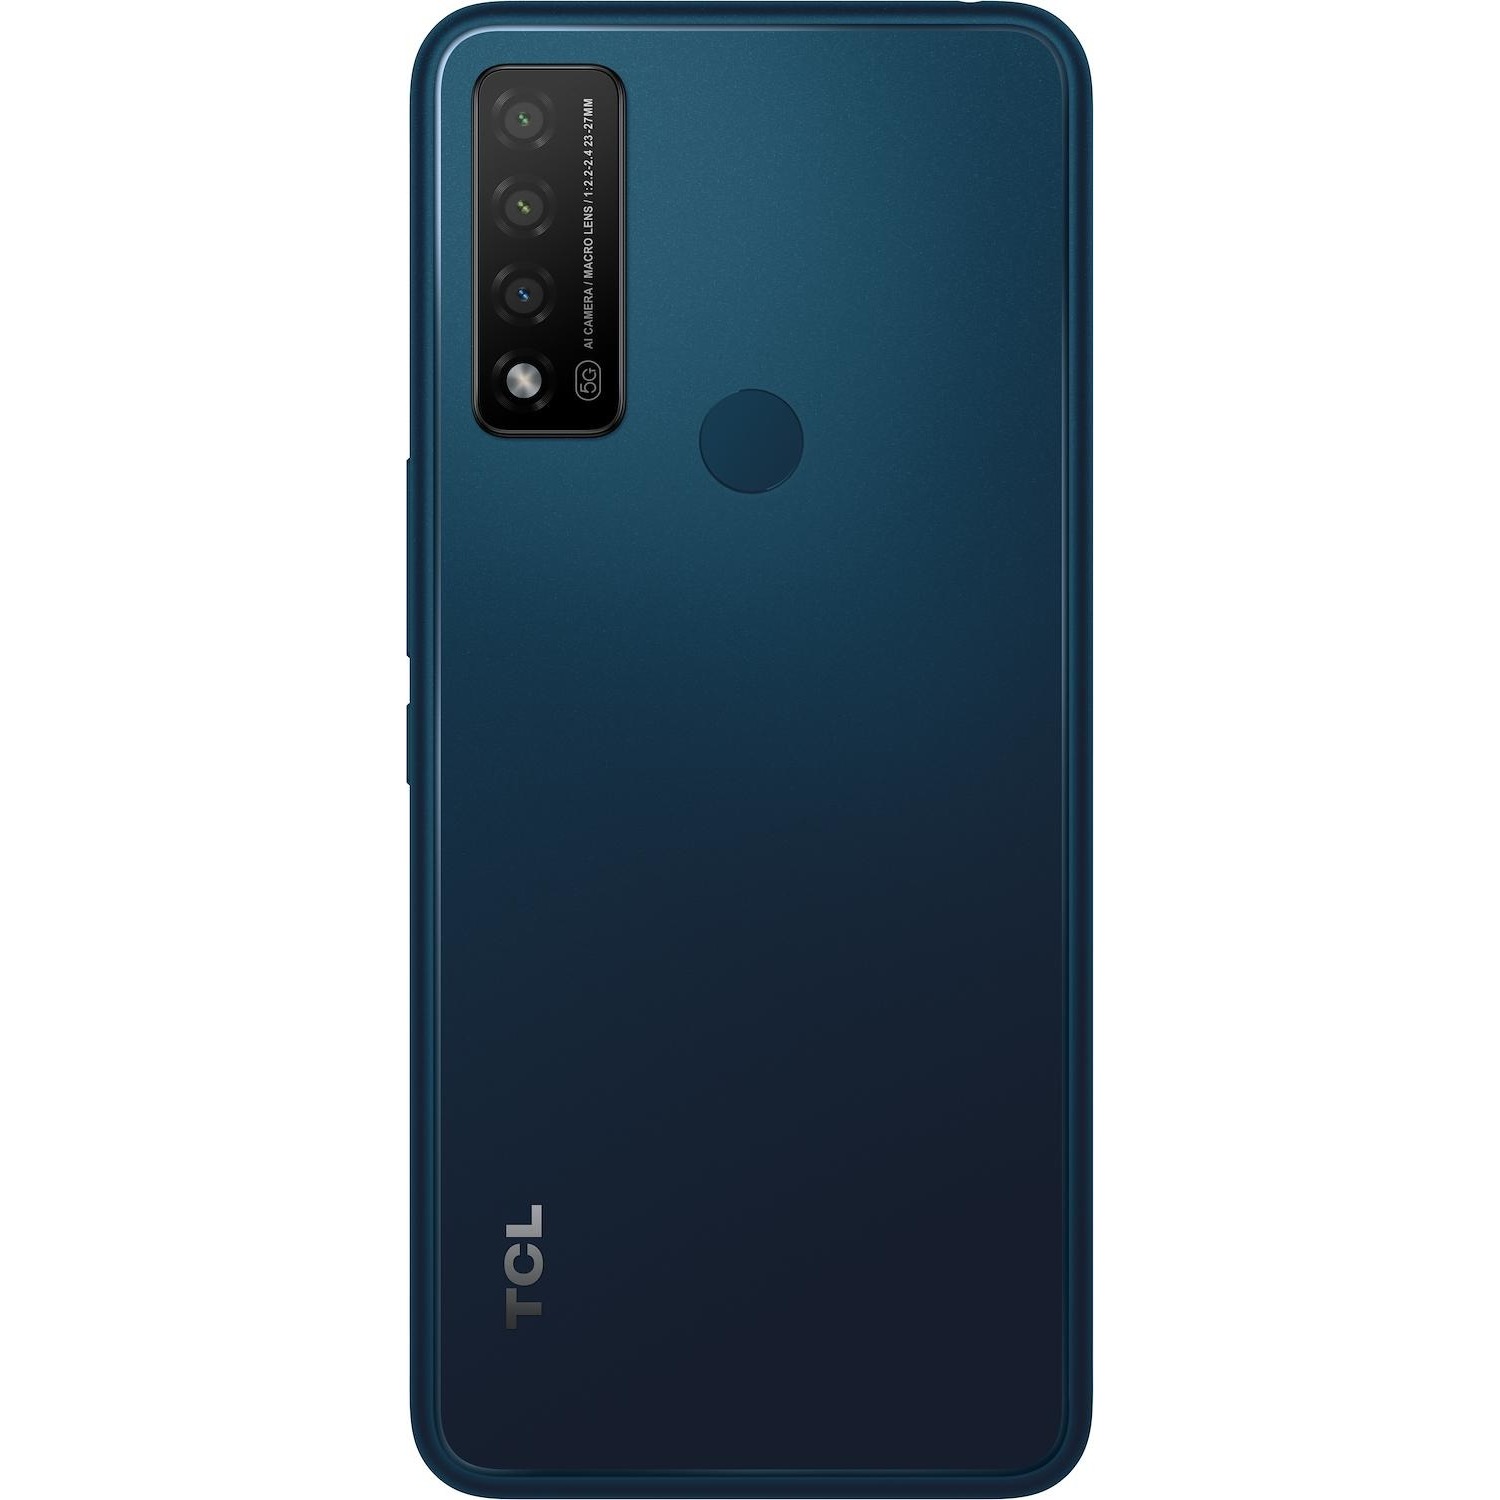 Image of Smartphone TCL 20R 5G lazurite blue